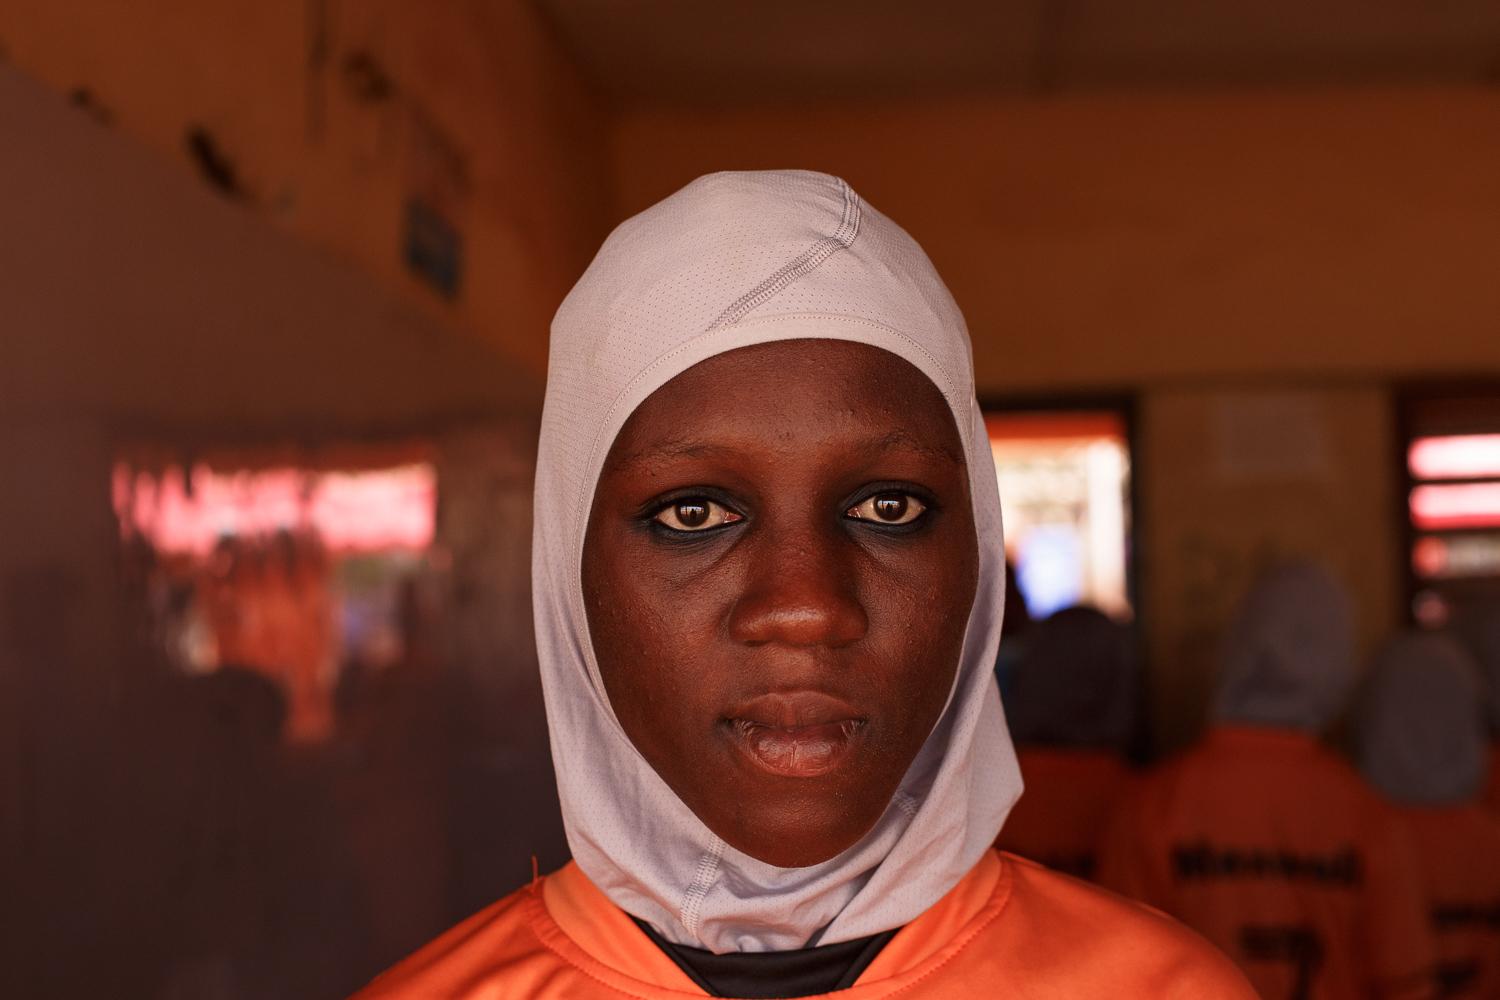 Image from Faith and Football - Rashida, 15years old, poses for a photograph in a Hijab...